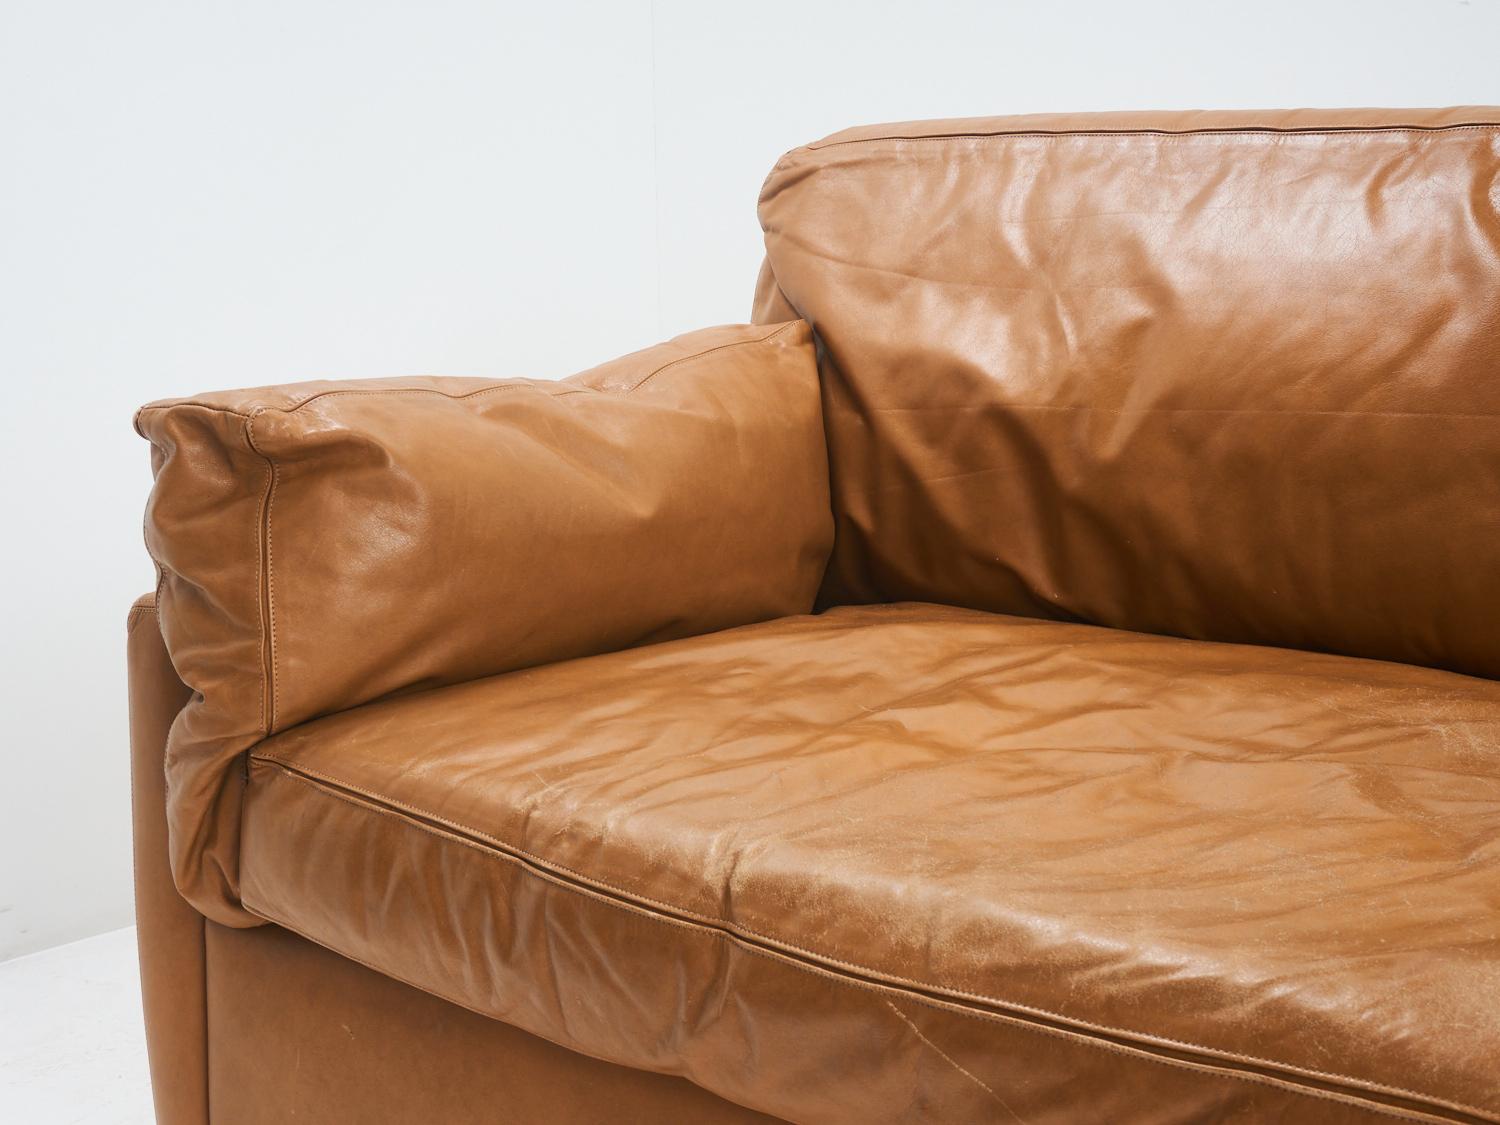 1970s Cognac Leather Sofa In Good Condition For Sale In Philadelphia, PA